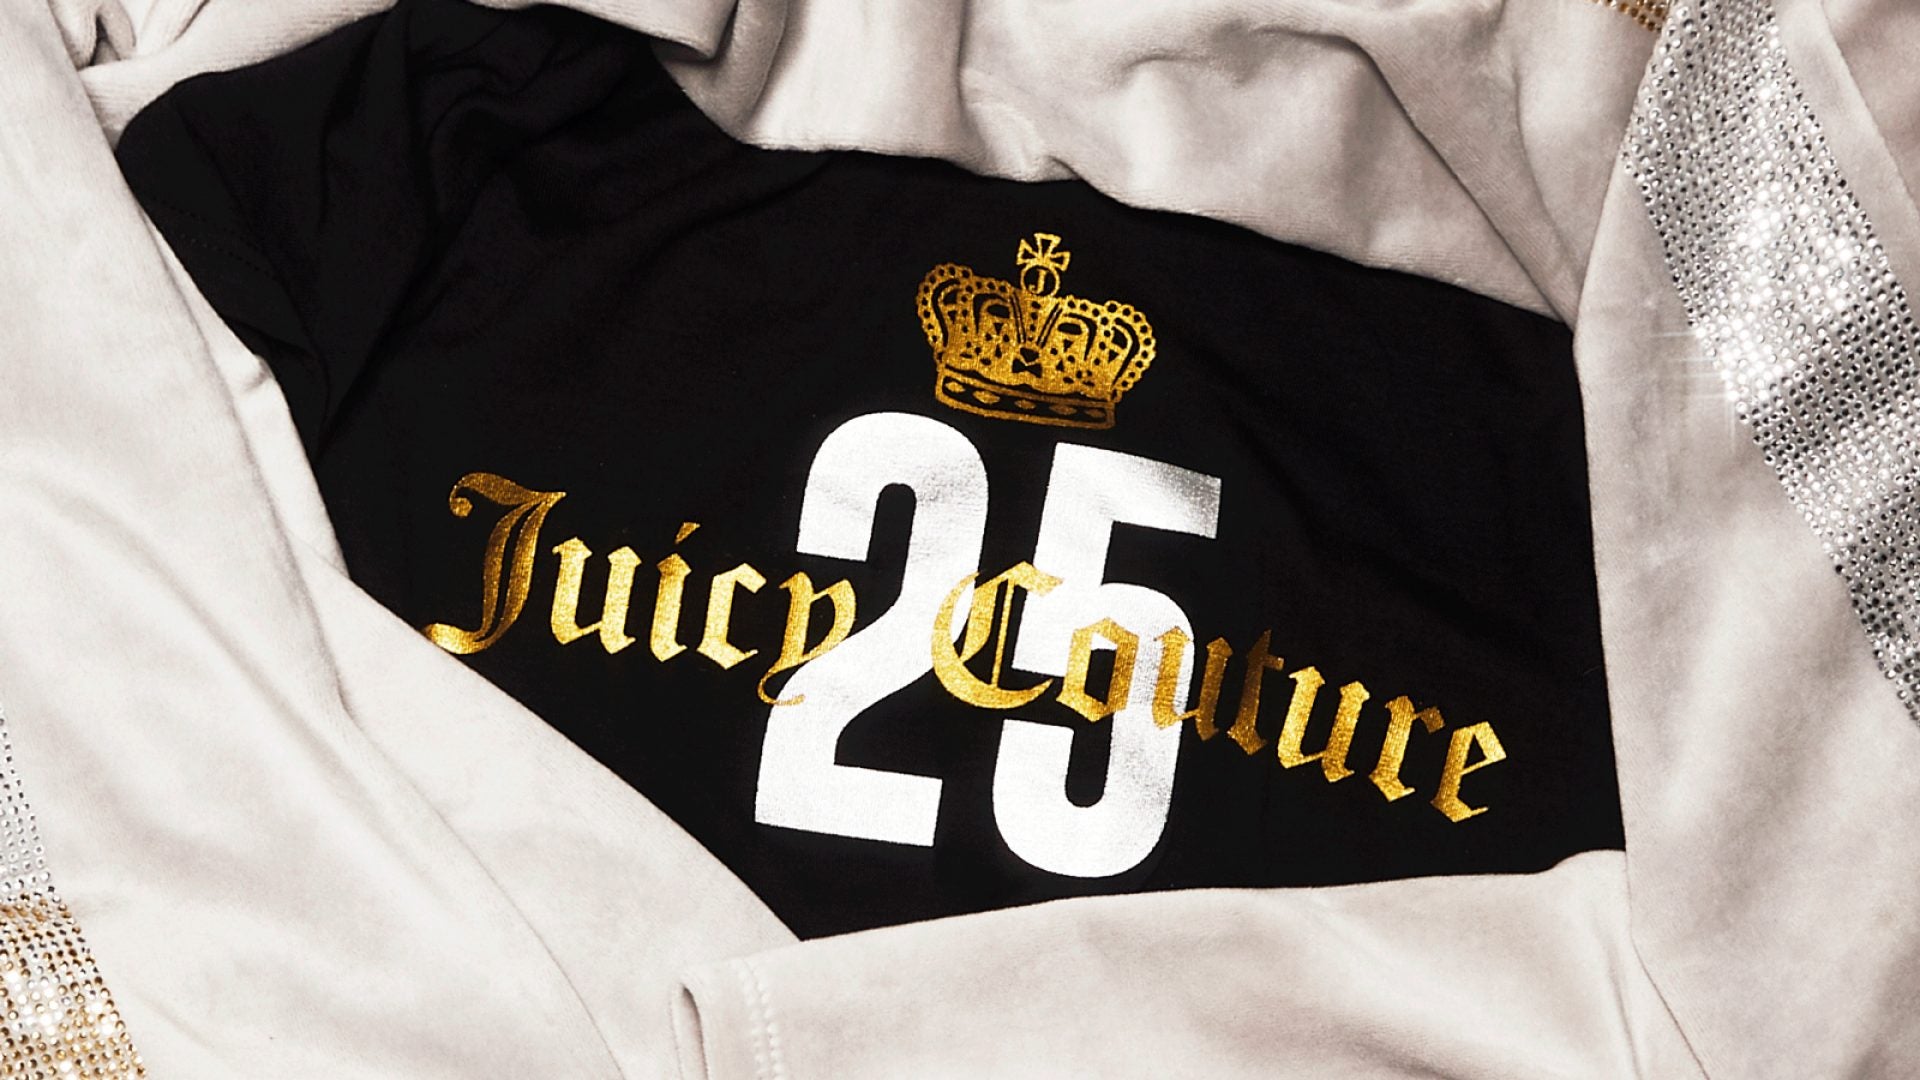 Juicy Couture Celebrates 25 Years In The Fashion Industry